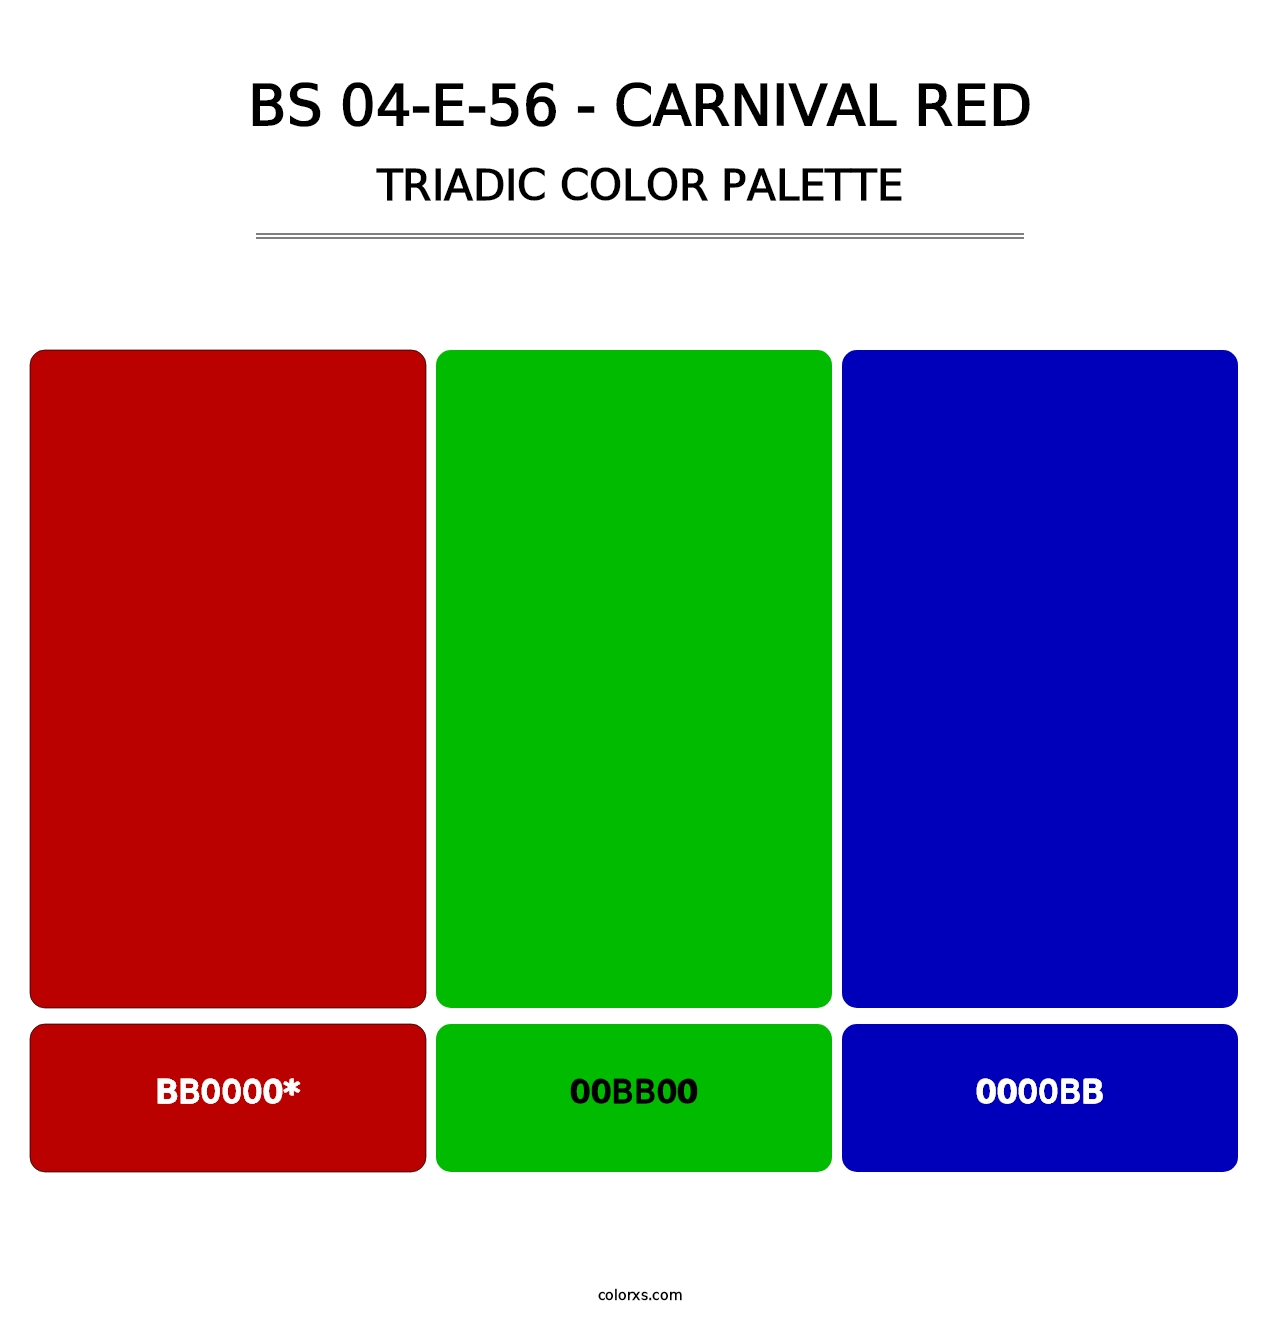 BS 04-E-56 - Carnival Red - Triadic Color Palette